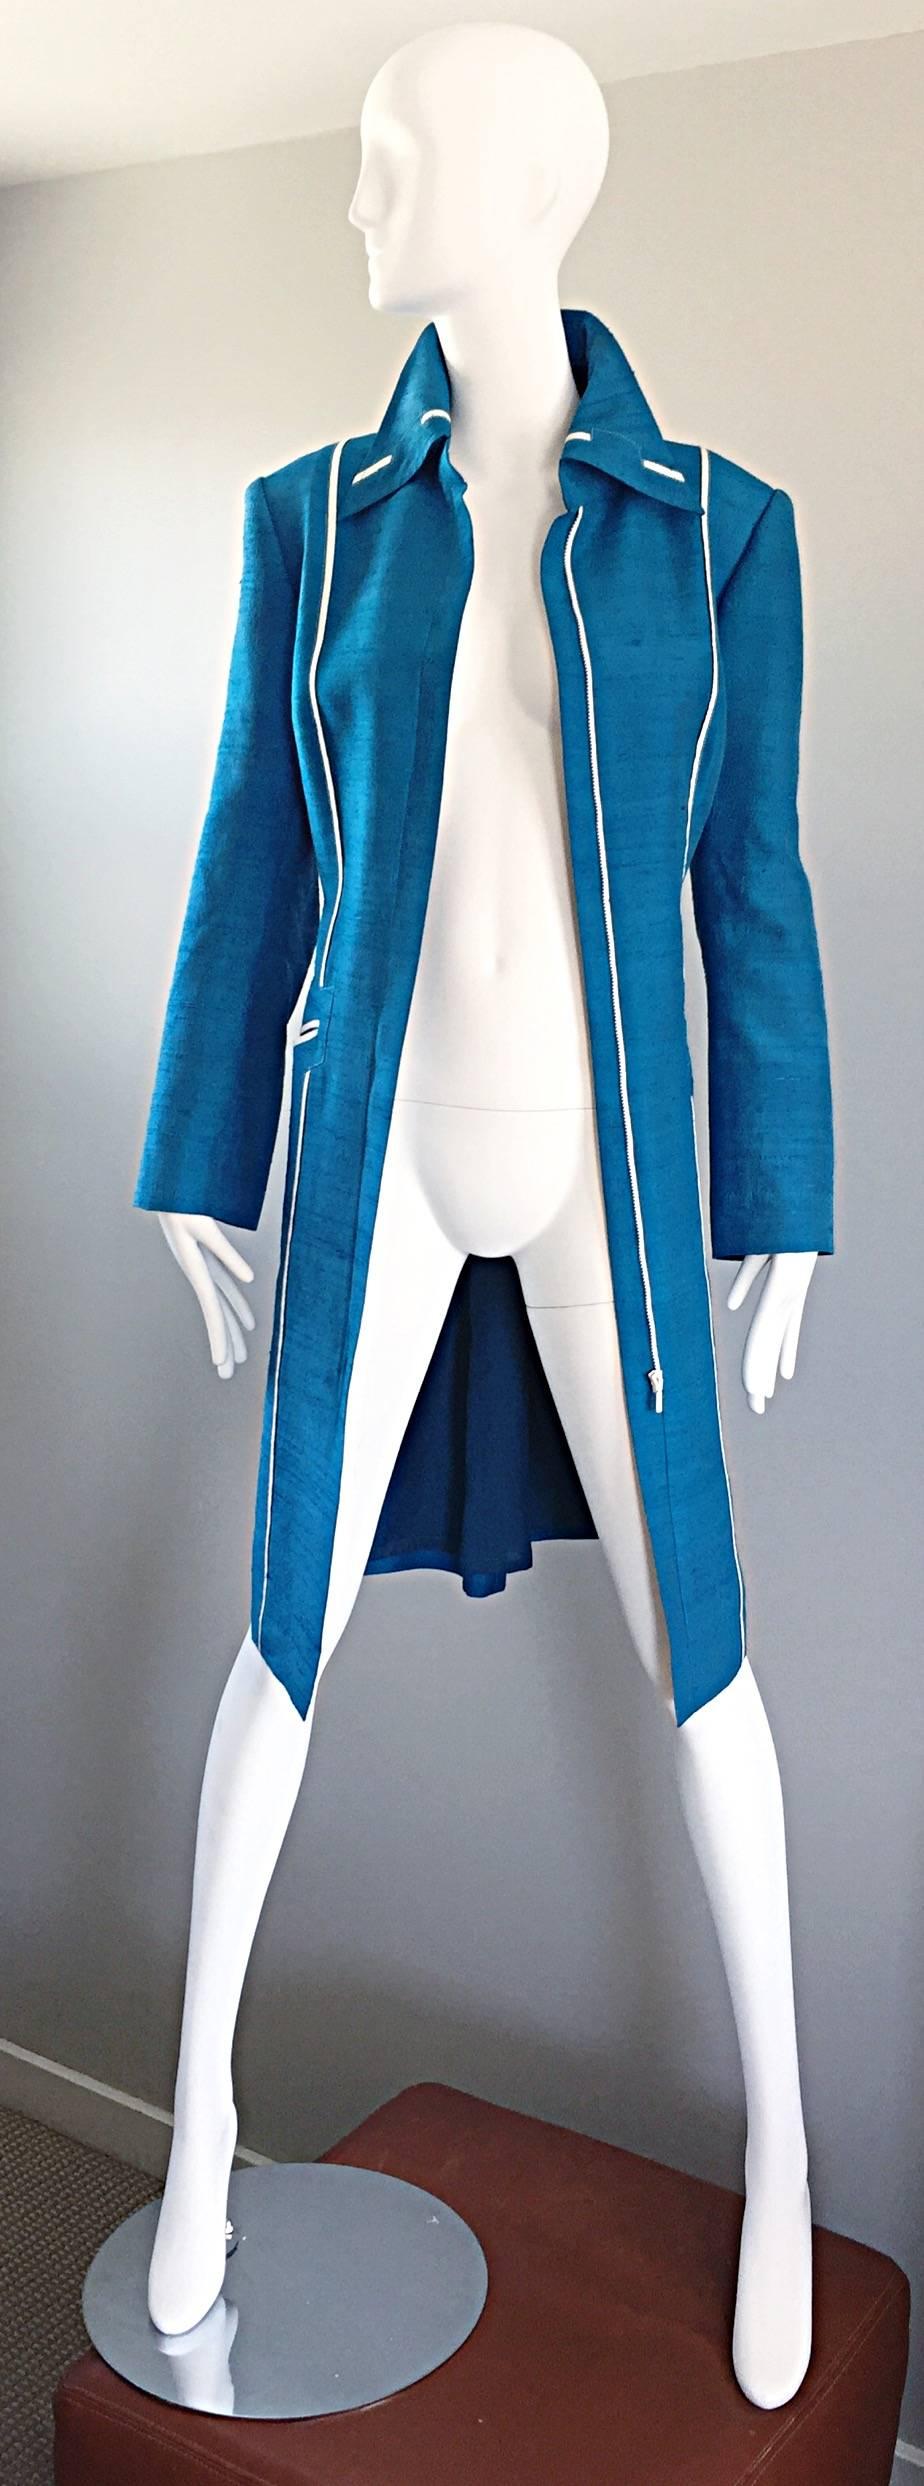 Max Nugas Haute Couture Vintage Cerulean Blue Silk Shantung Jacket Coat, 1970s In Excellent Condition For Sale In San Diego, CA